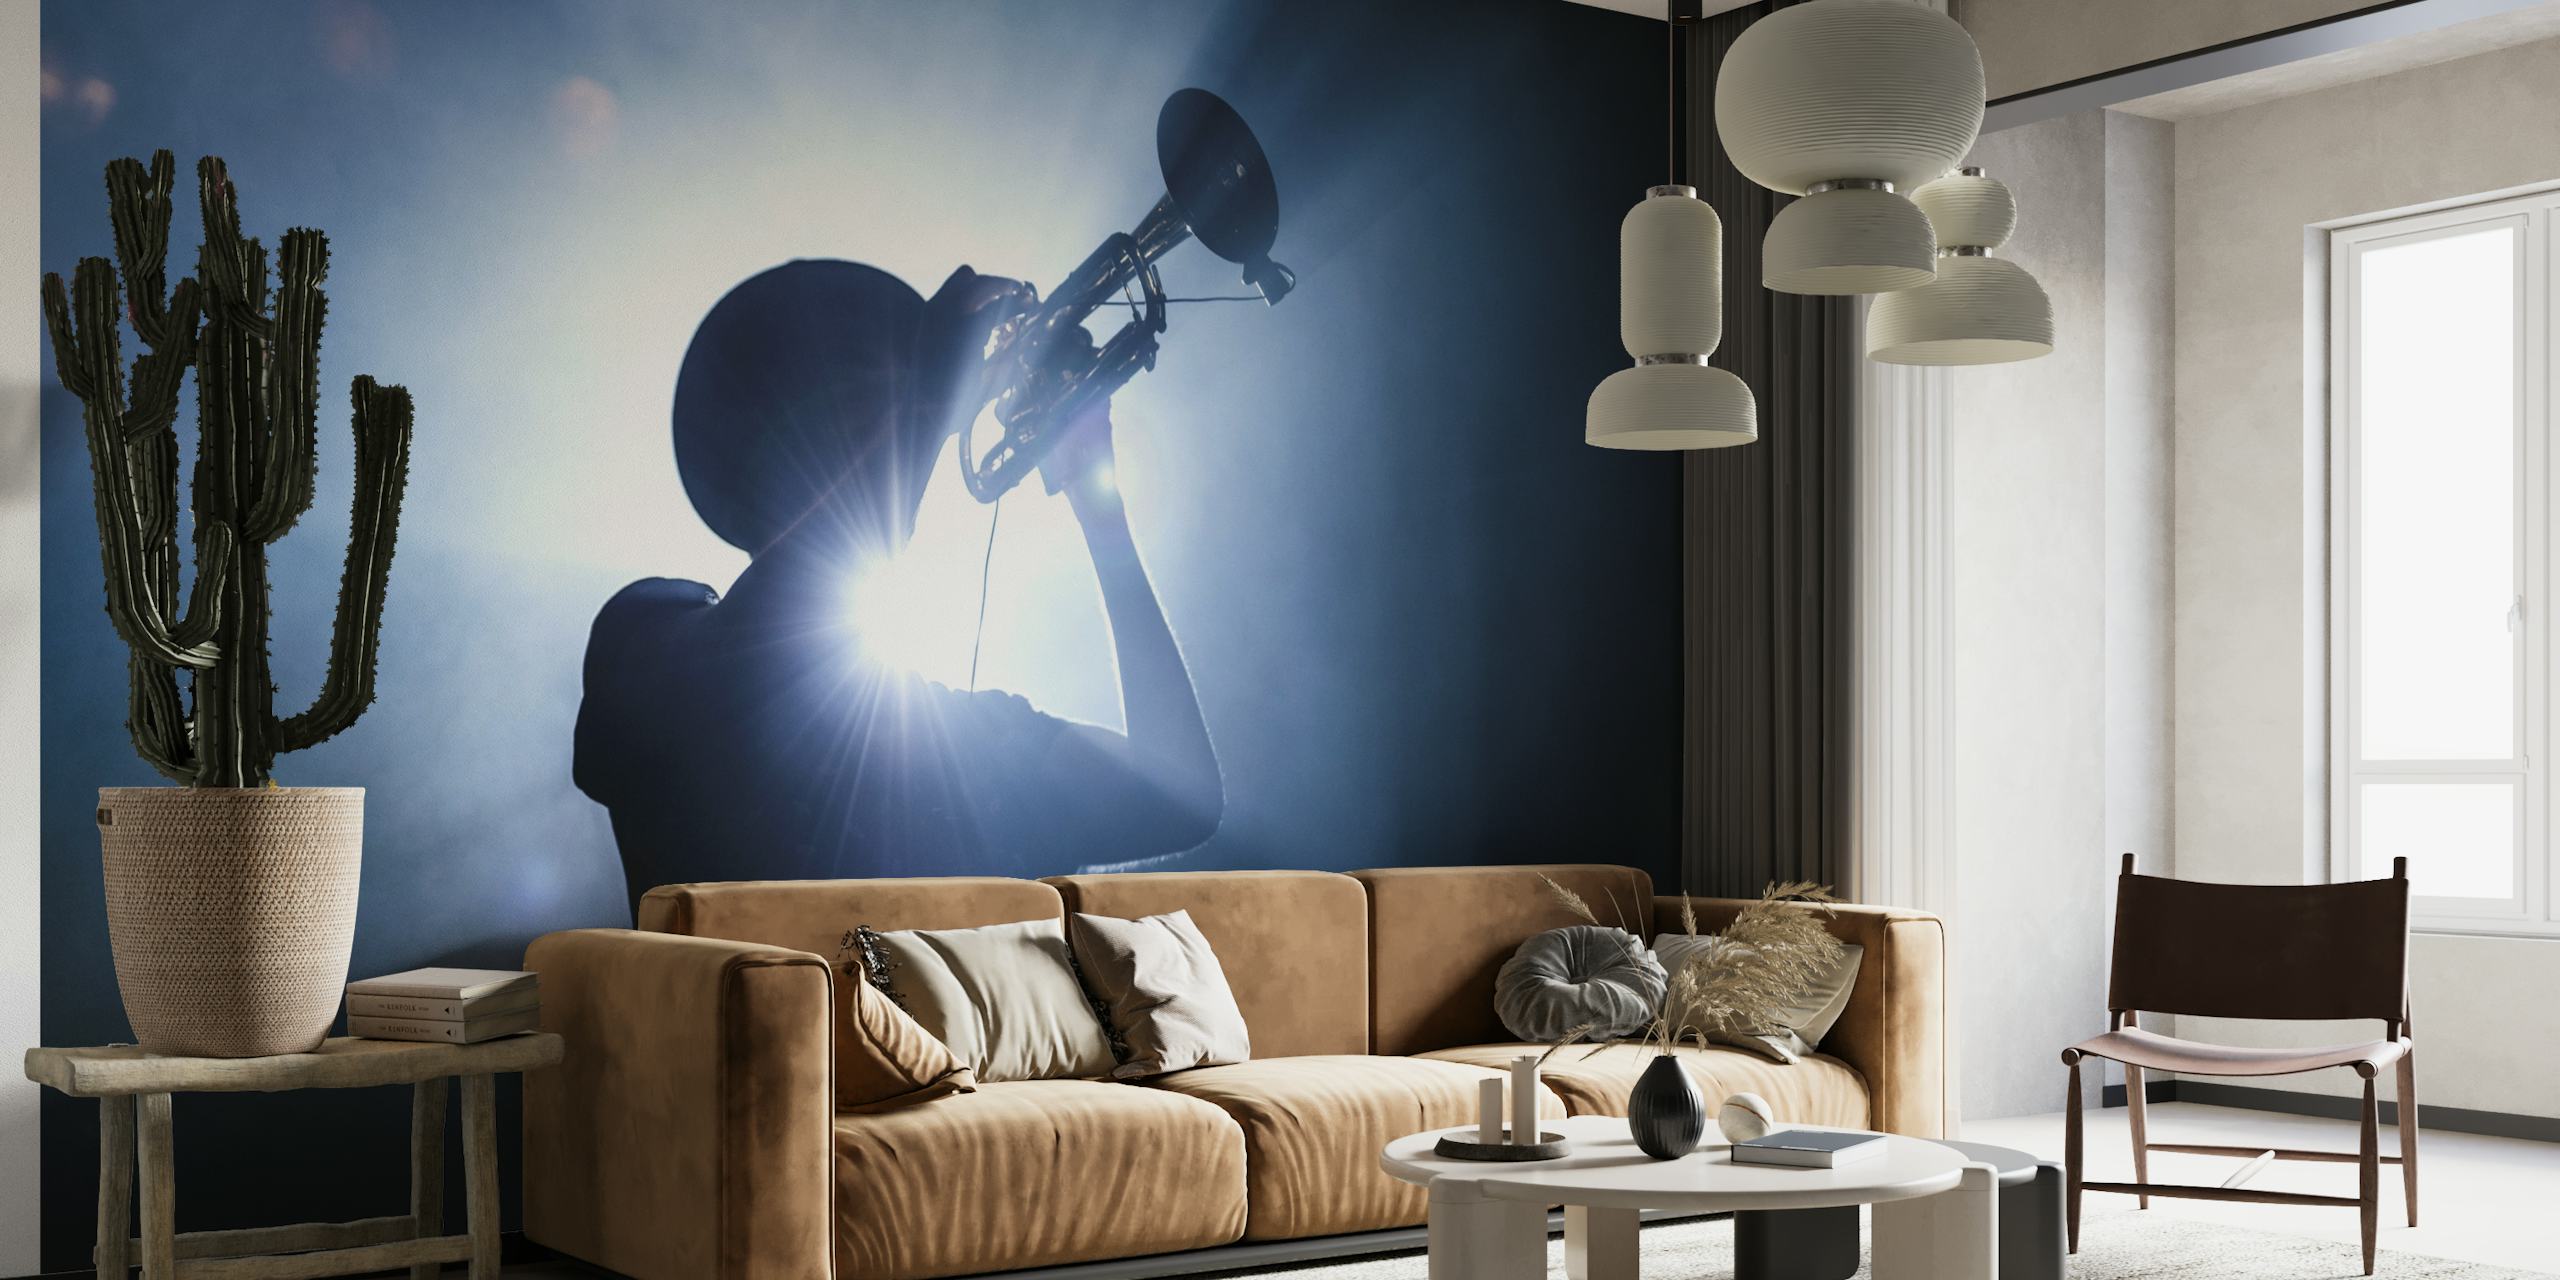 Silhouette of a trumpet player against a moody, illuminated backdrop, creating a commanding wall mural image.